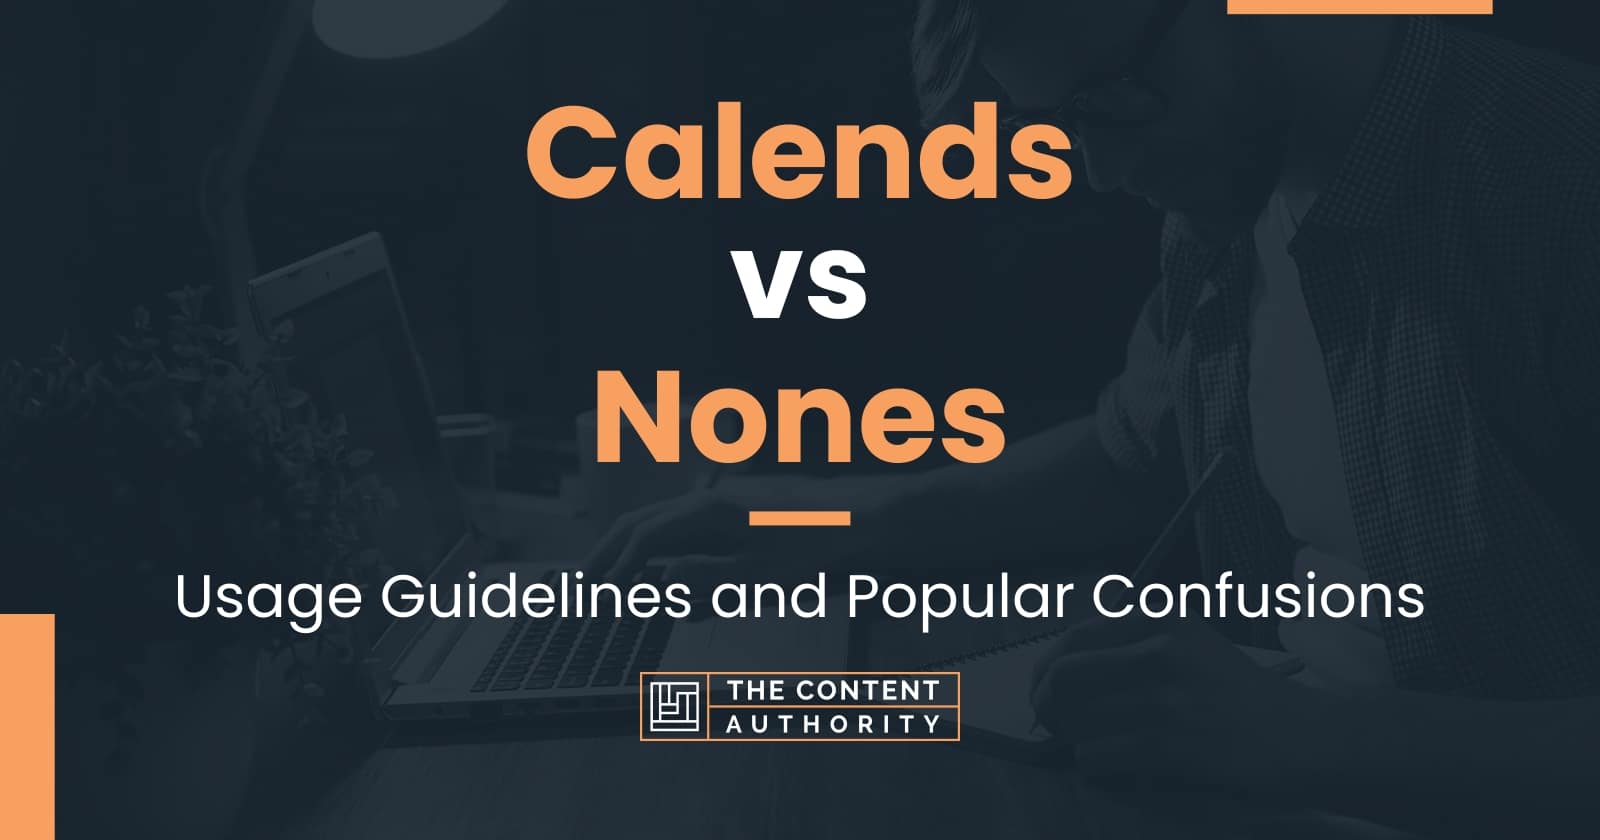 Calends vs Nones Usage Guidelines and Popular Confusions